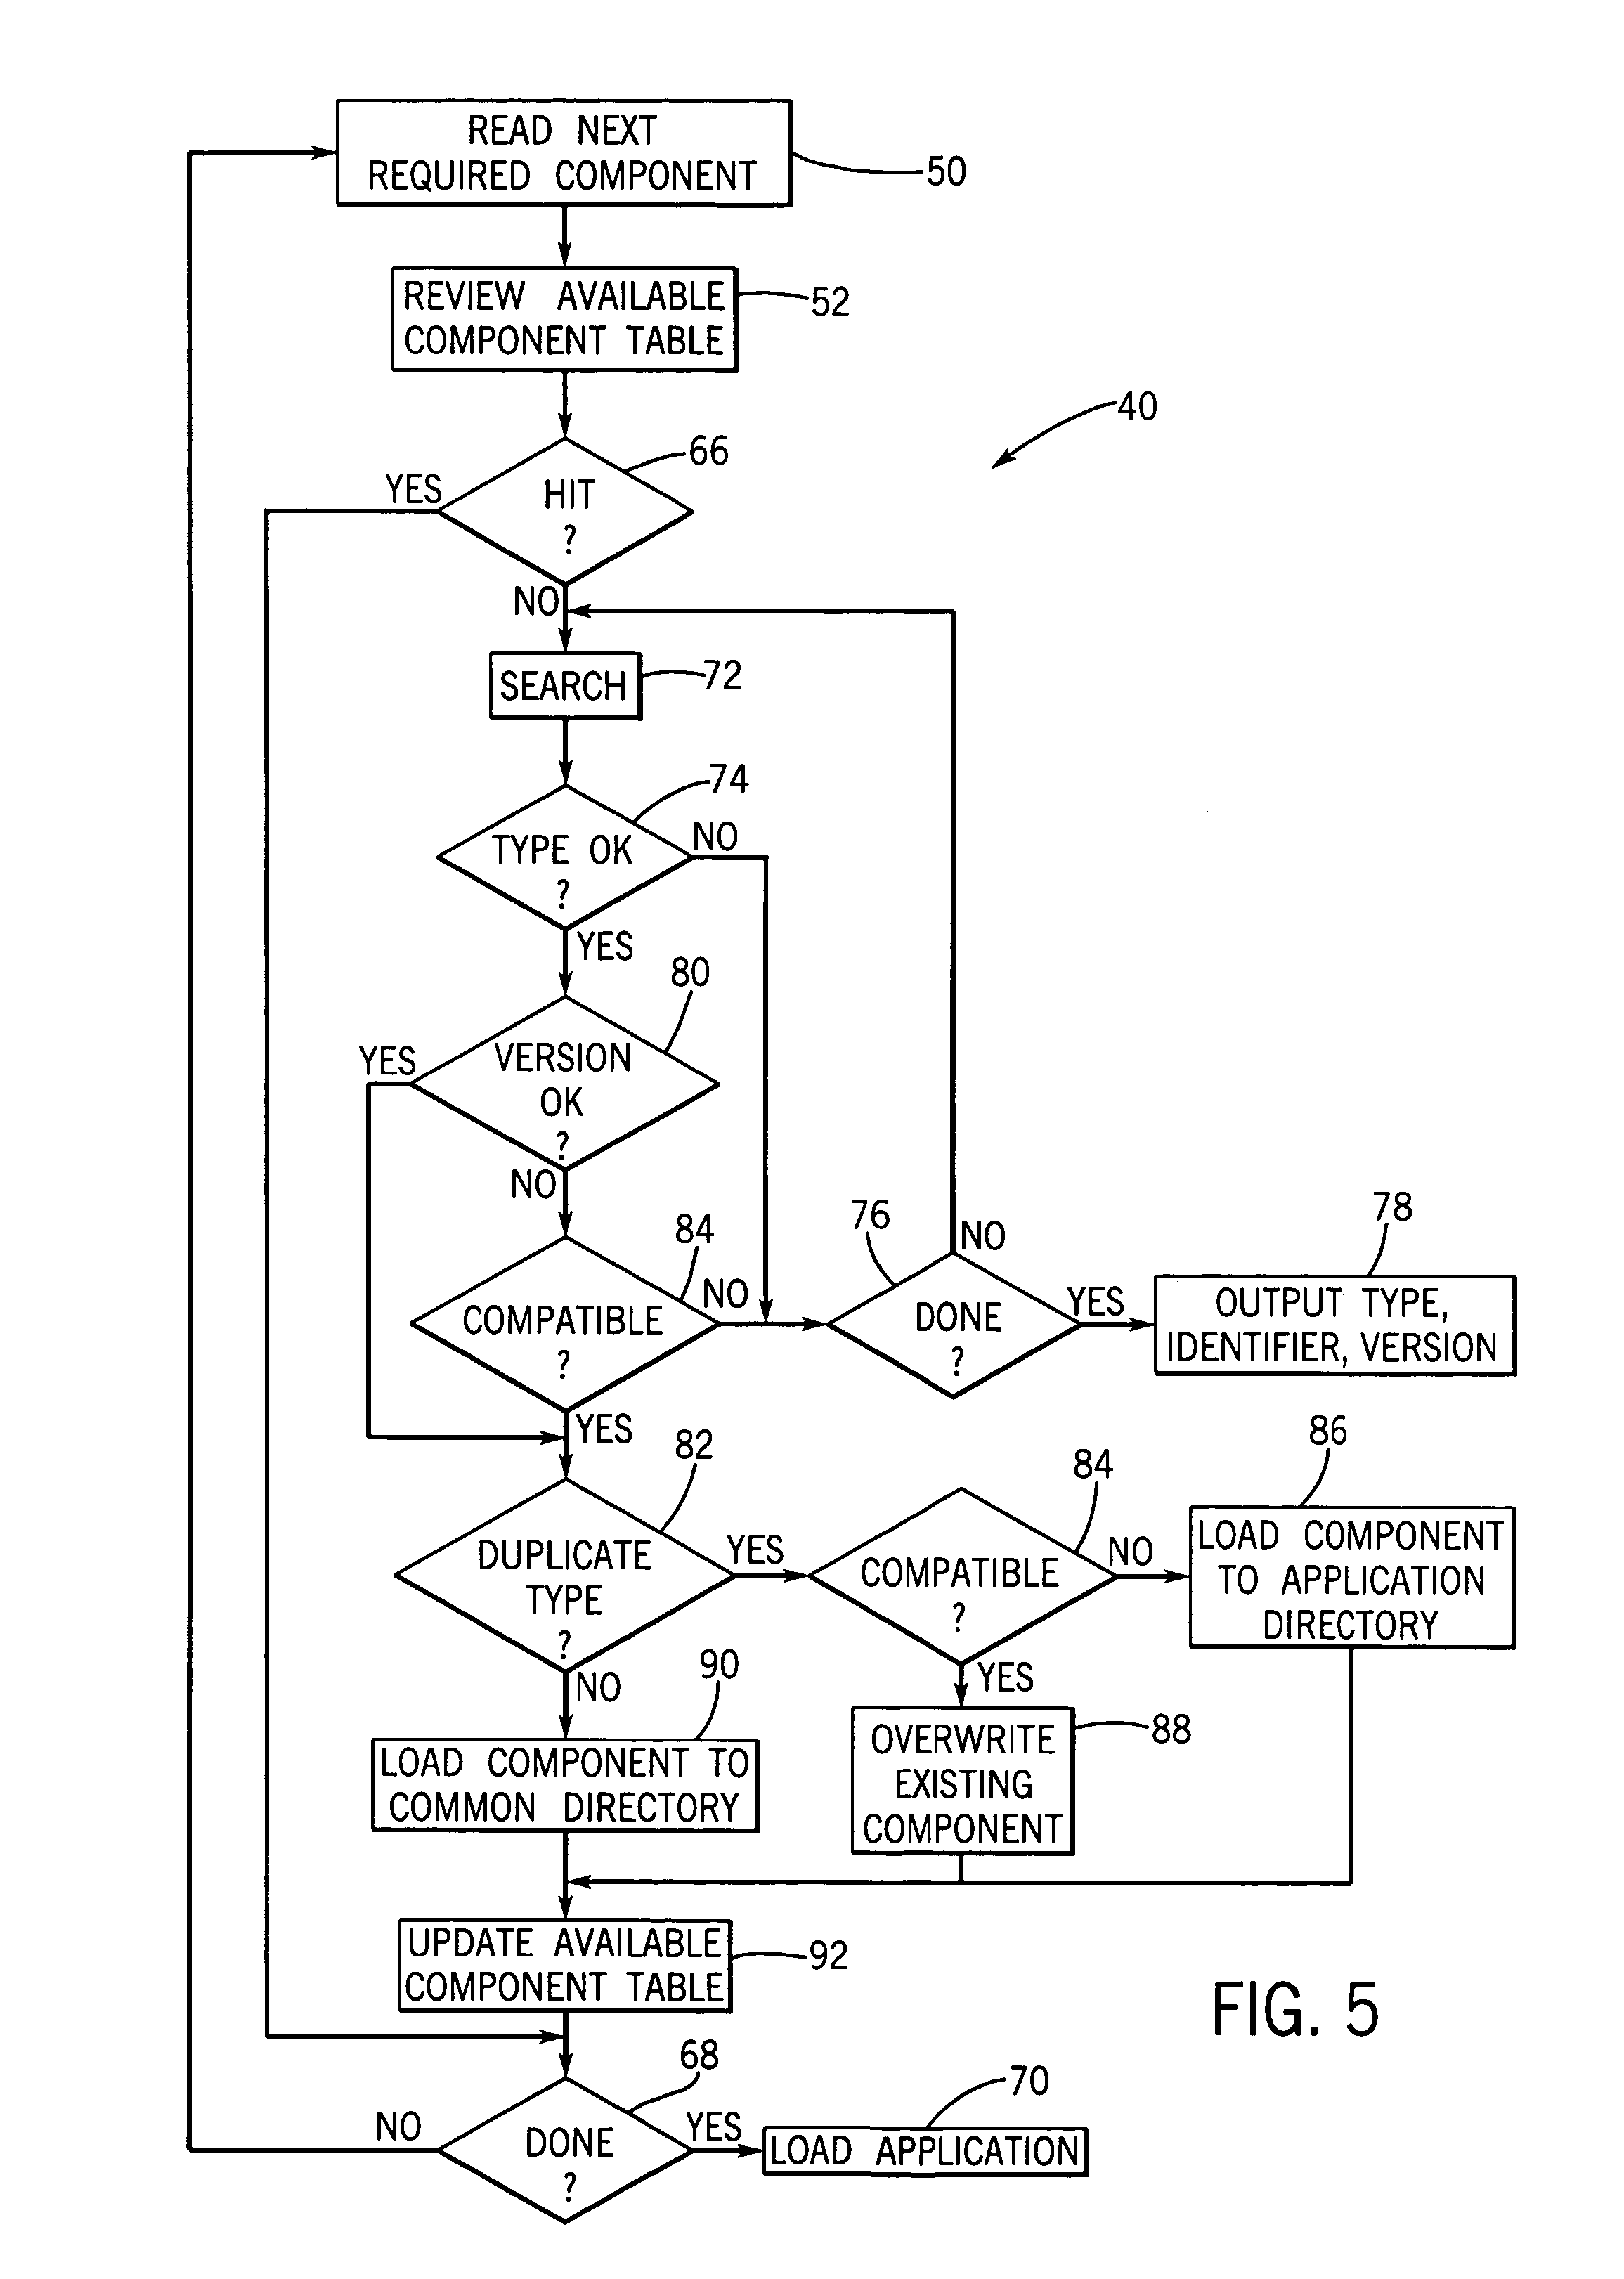 Component loader for industrial control device providing resource search capabilities